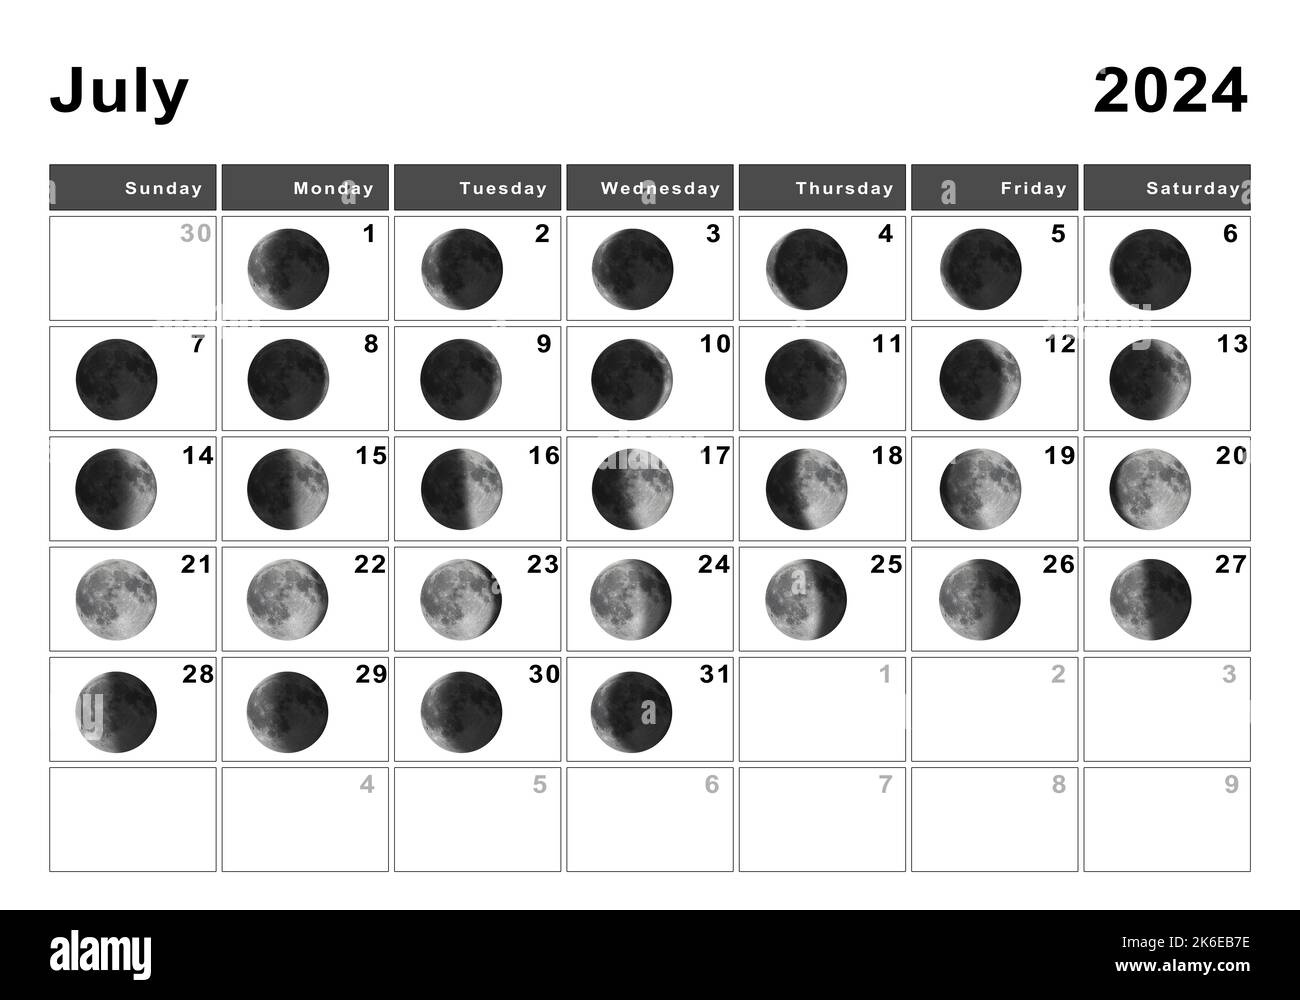 July 2024 Lunar Calendar, Moon Cycles, Moon Phases Stock Photo - Alamy pertaining to July 18Th Lunar Calendar 2024